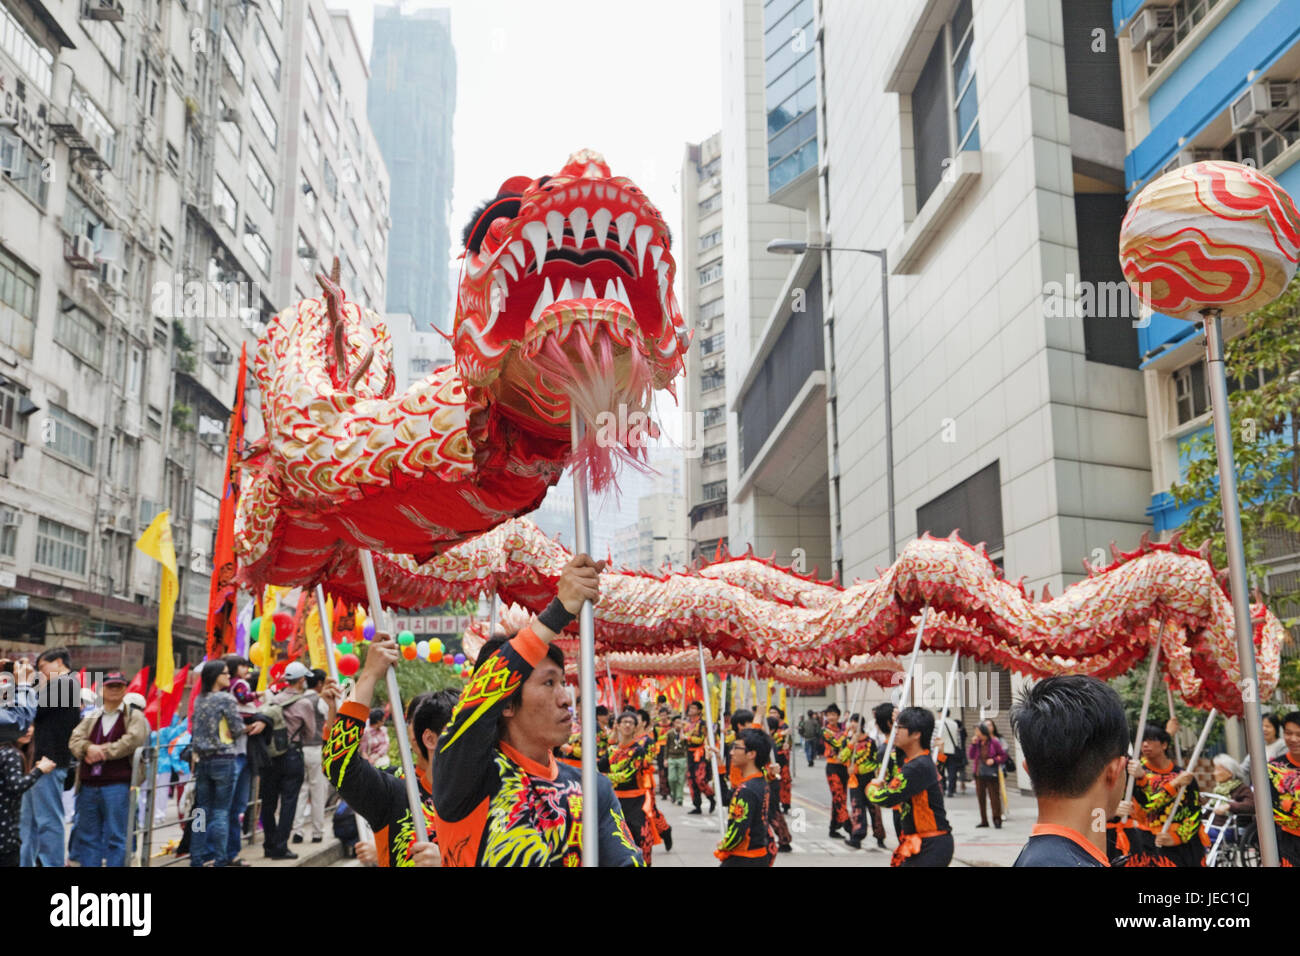 China, Hong Kong, dragon's dance, men, tradition, mass, tourism, save, dragon's dance, dance, culture, paper dragon, dragon, in Chinese, cogs, bite, person, young, tourists, Stock Photo